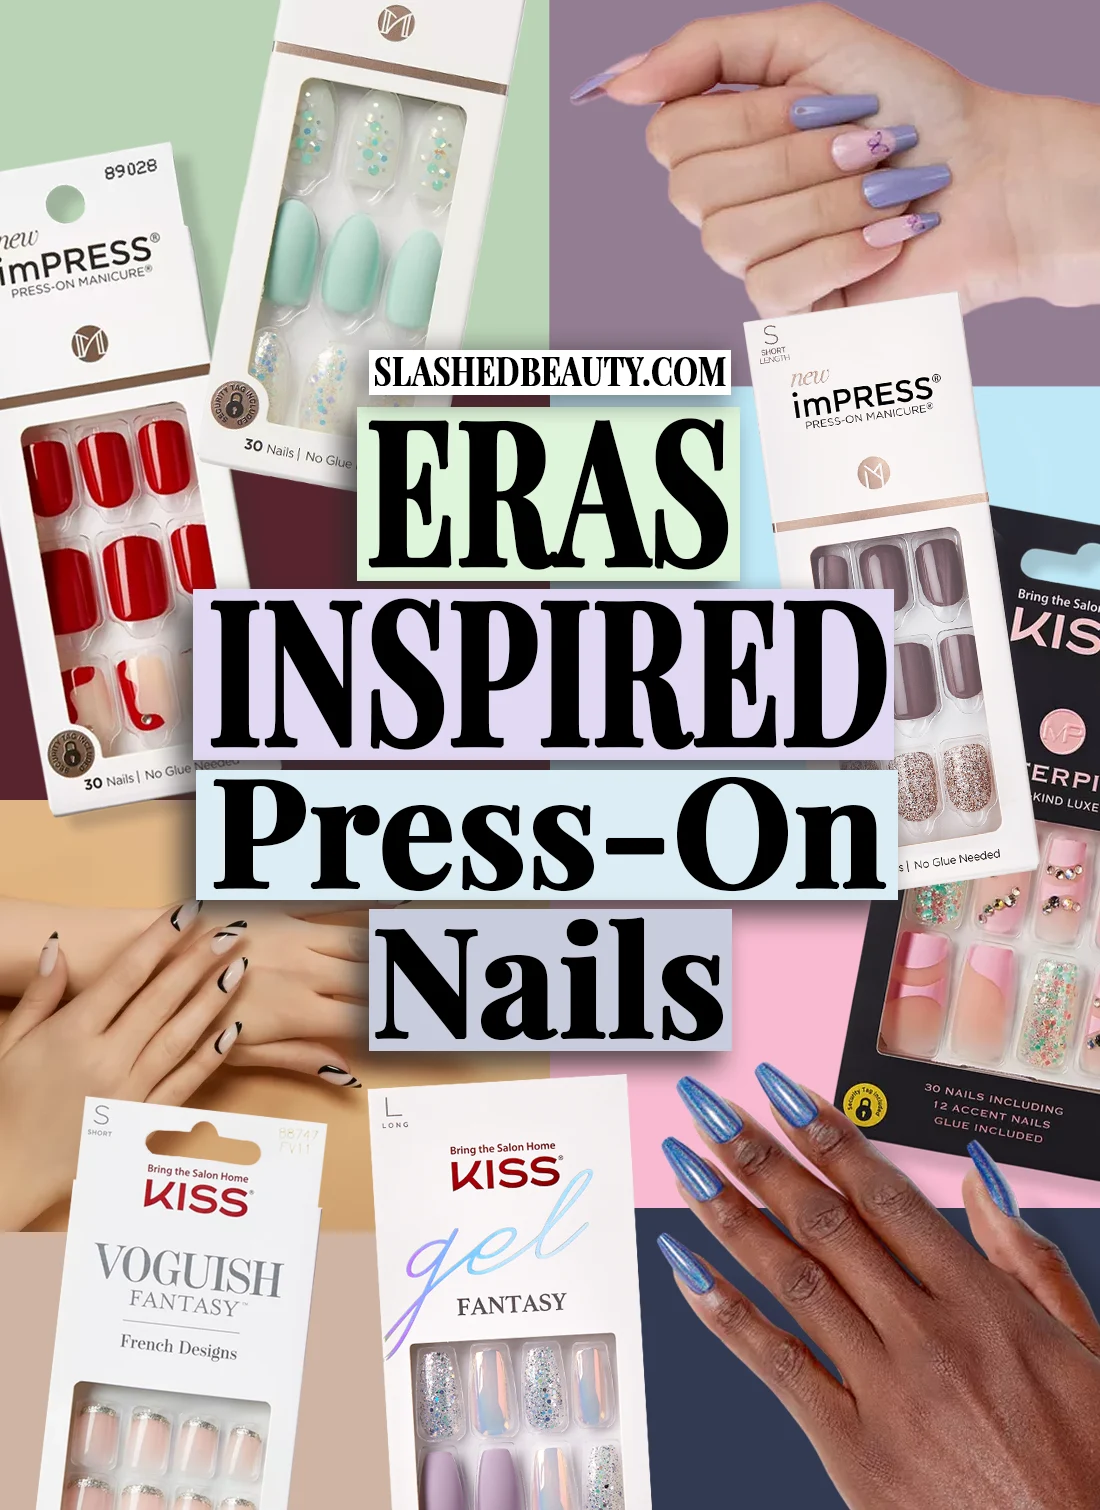 Collage of press on nails with text: Eras Inspired Press-On Nails | Taylor Swift Eras Drugstore Press On Nails | Slashed Beauty